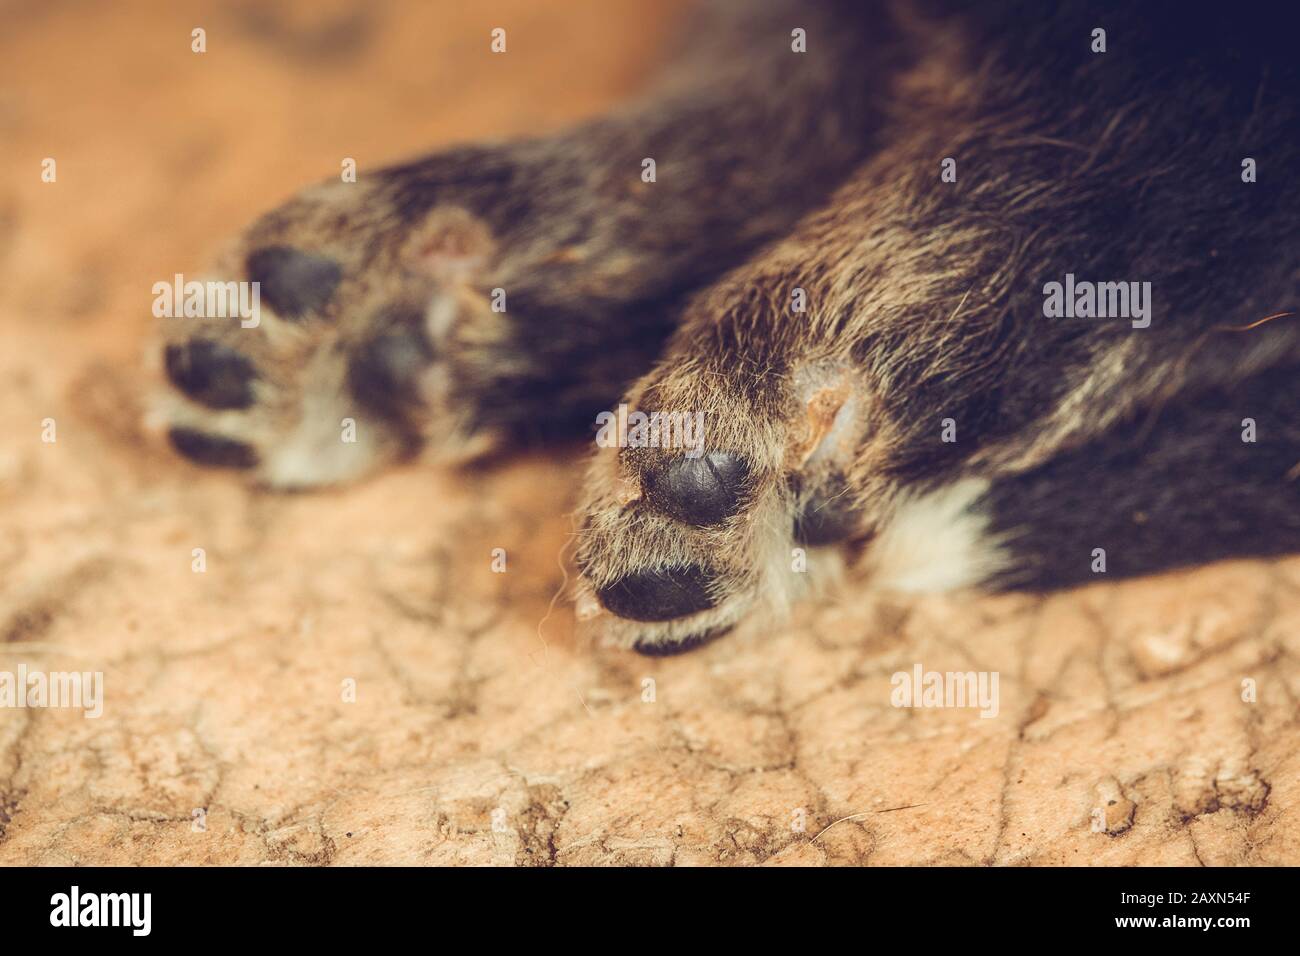 hind legs small puppies with black hair close-up filter Stock Photo